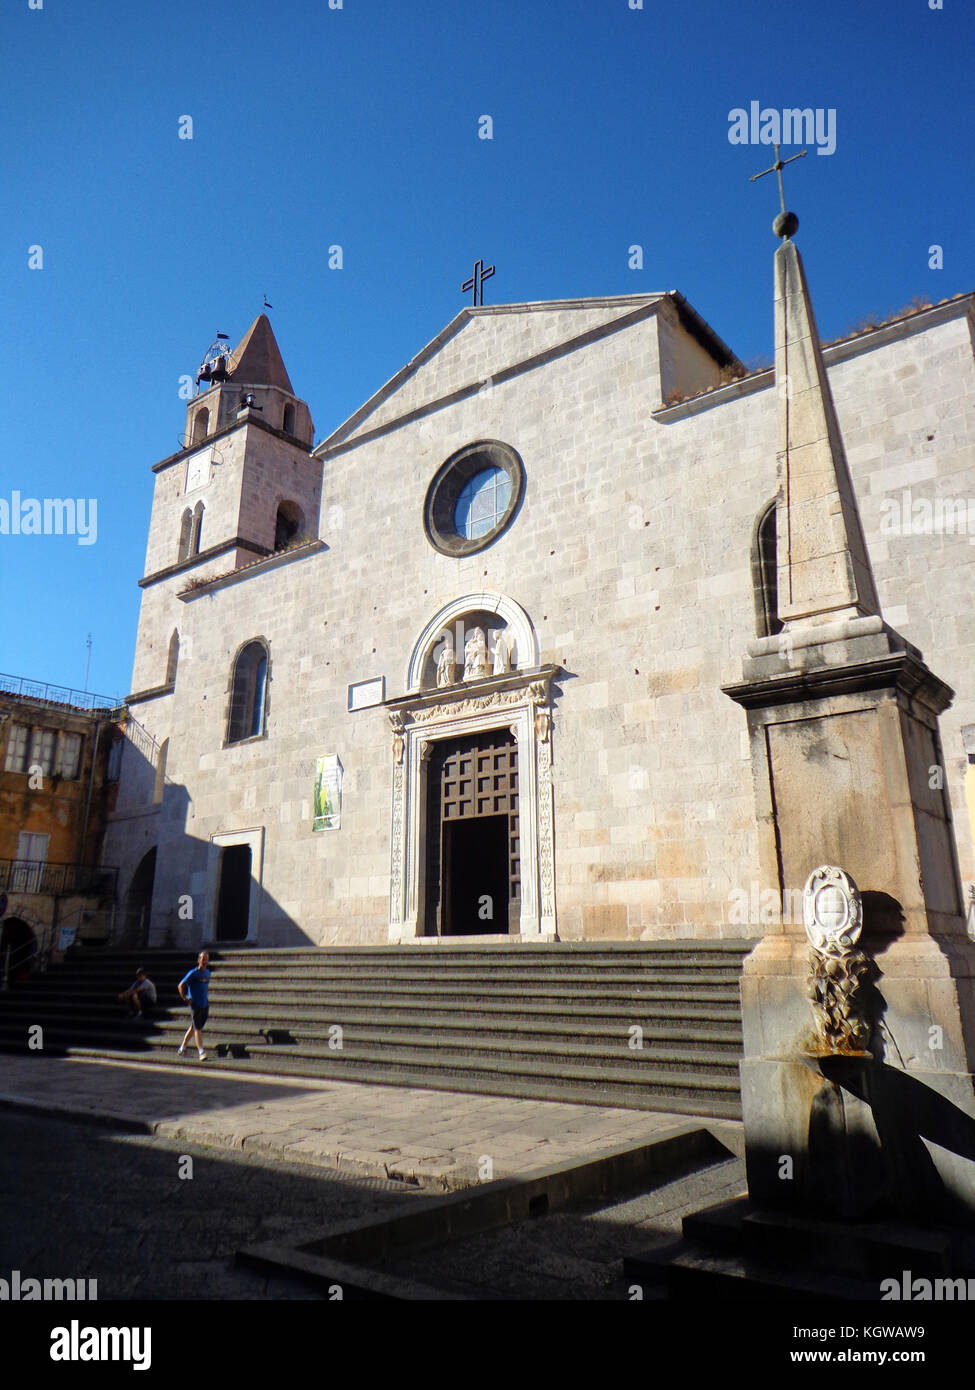 Fondi, Italy - 10 june 2013: Church of Santa Maria in Piazza. Fondi's urban core is located in the south pontino halfway between Rome and Naples. Stock Photo